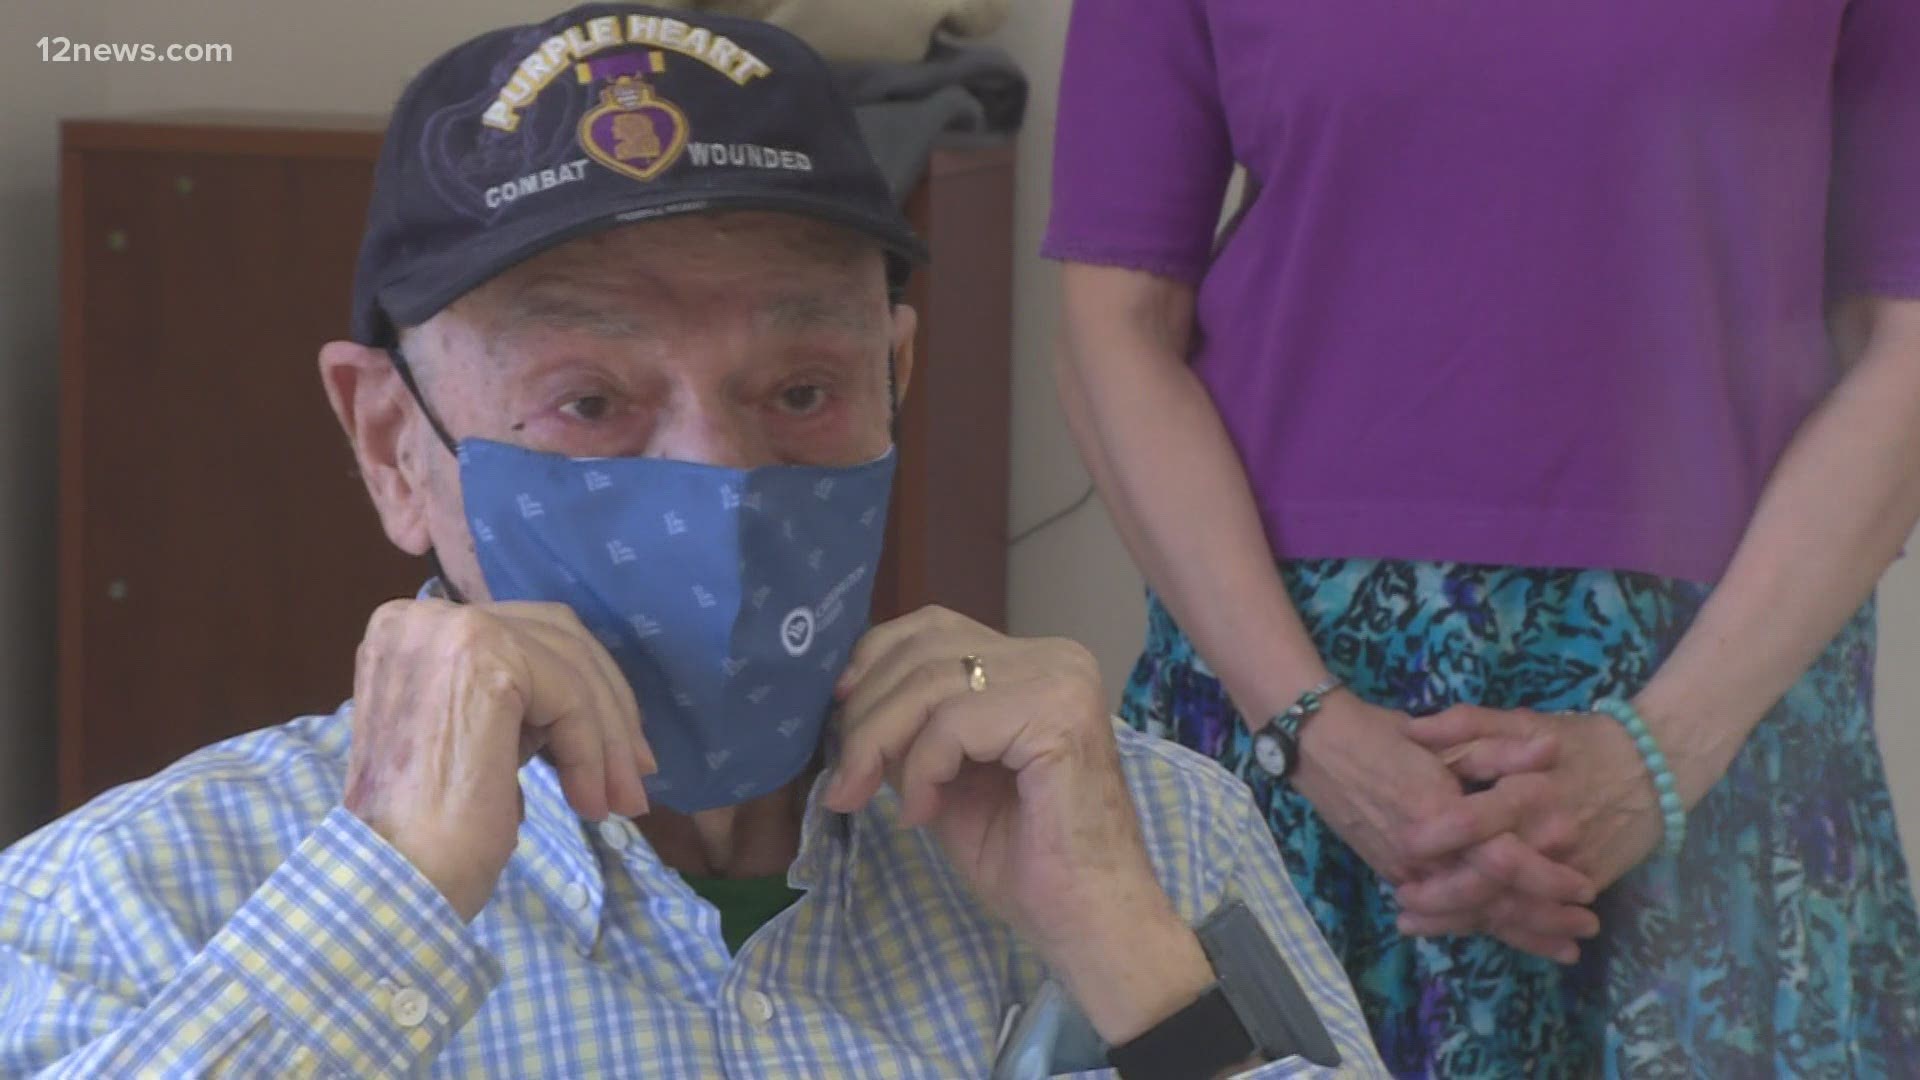 Irving Wohl was treated like royalty for his 105th birthday. The WWII veteran was celebrated at Carrington College.